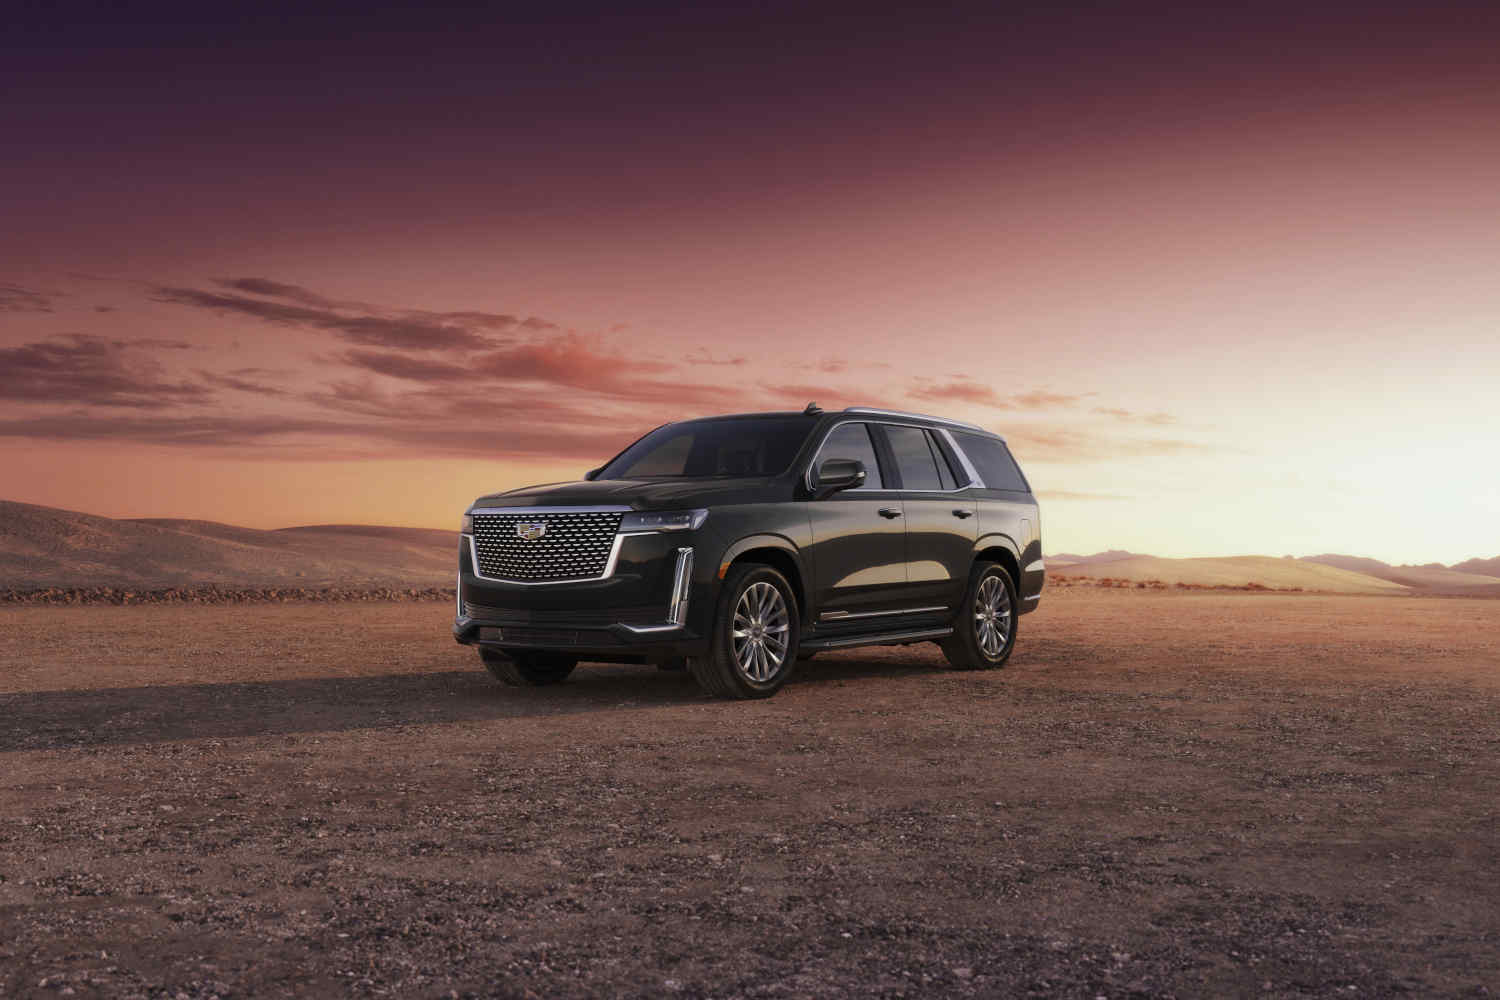 The best 4x4 SUVs under $120,000 include this Cadillac Escalade